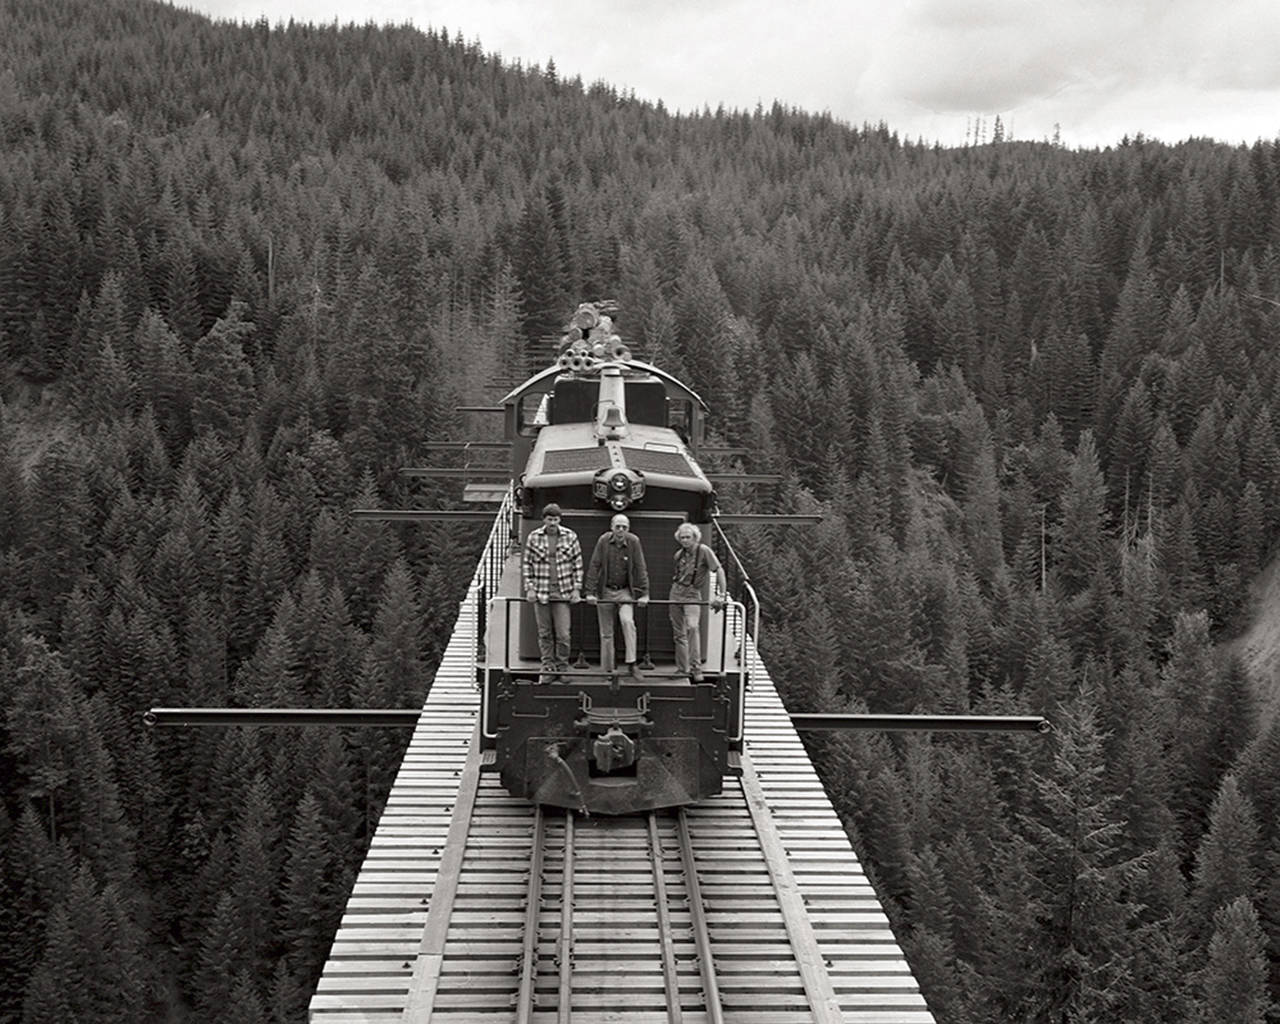 Photo by John Tylczak | Courtesy Polson Museum                                John Tylczak took this photo in 1985 from the top of a caboose on the Simpson Logging Co.’s Vance Creek railroad bridge. From left are Simpson railroad crew members Todd Young, Pete Replinger and Ed Nelson. This is one of the photos by Tylczak on display at the Polson Museum through the end of this year.